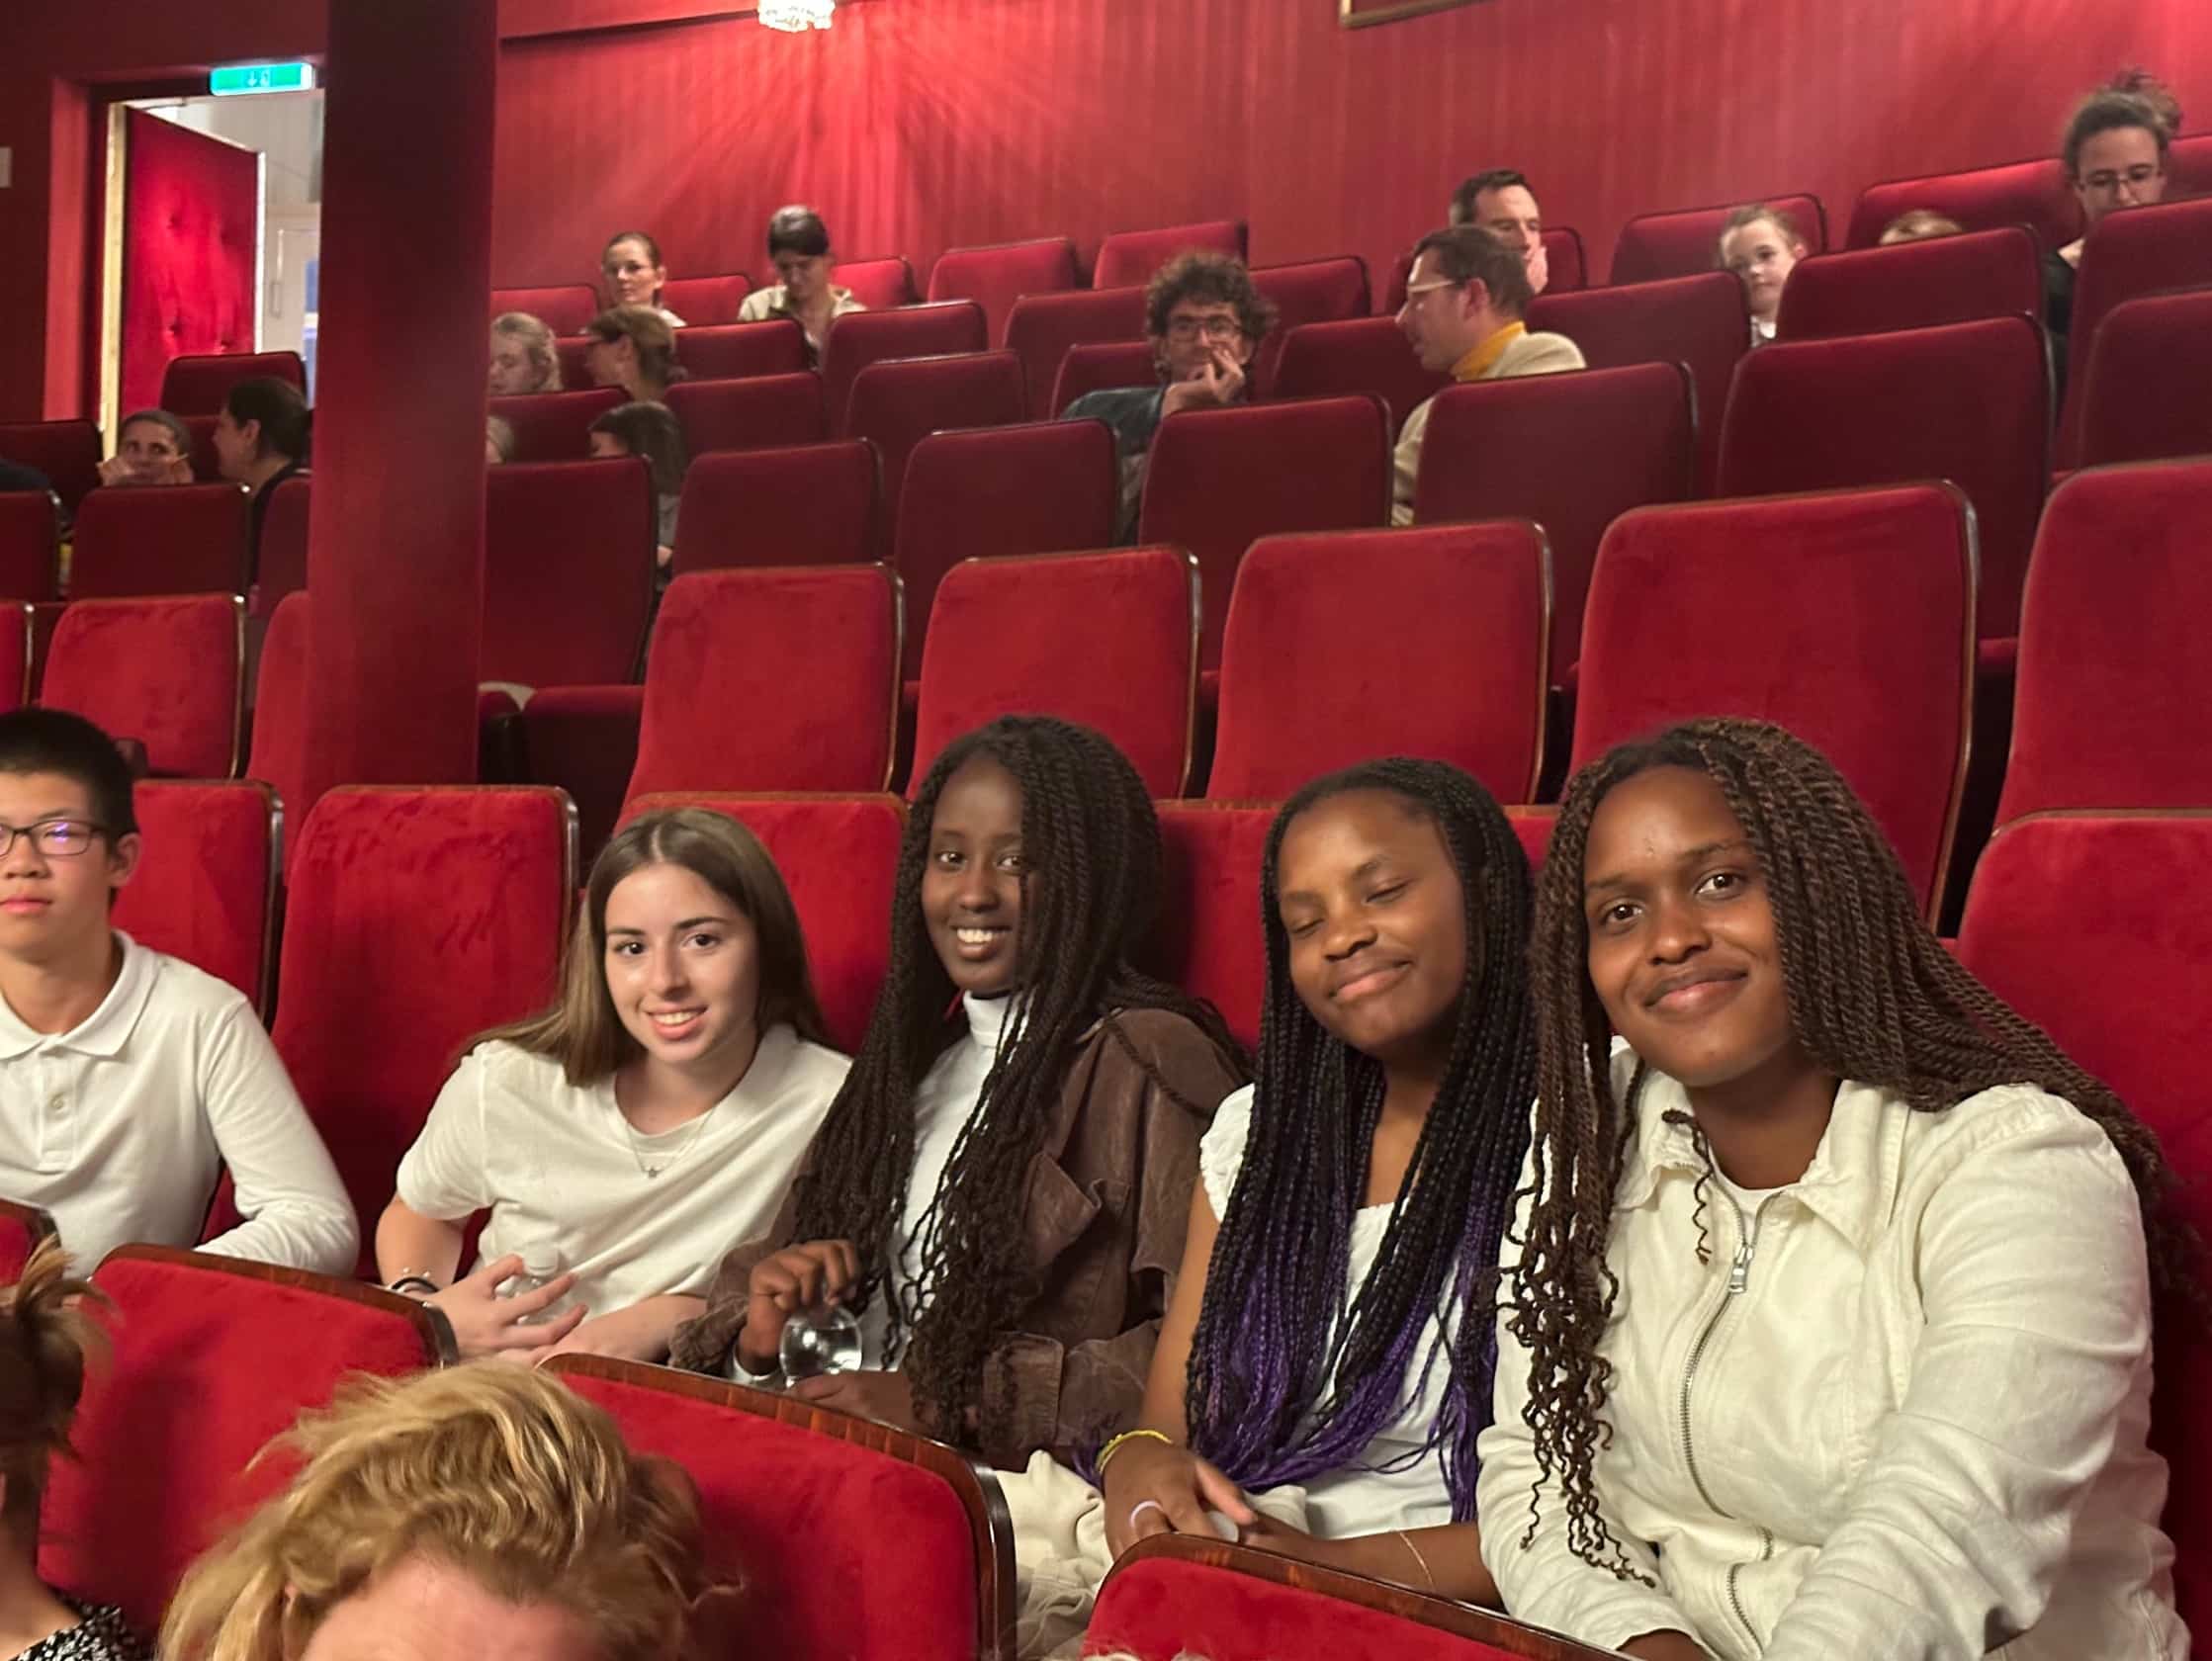 Cultivating Cultural Connections: SKIS attends the Coppélia ballet at the Volksoper Wien